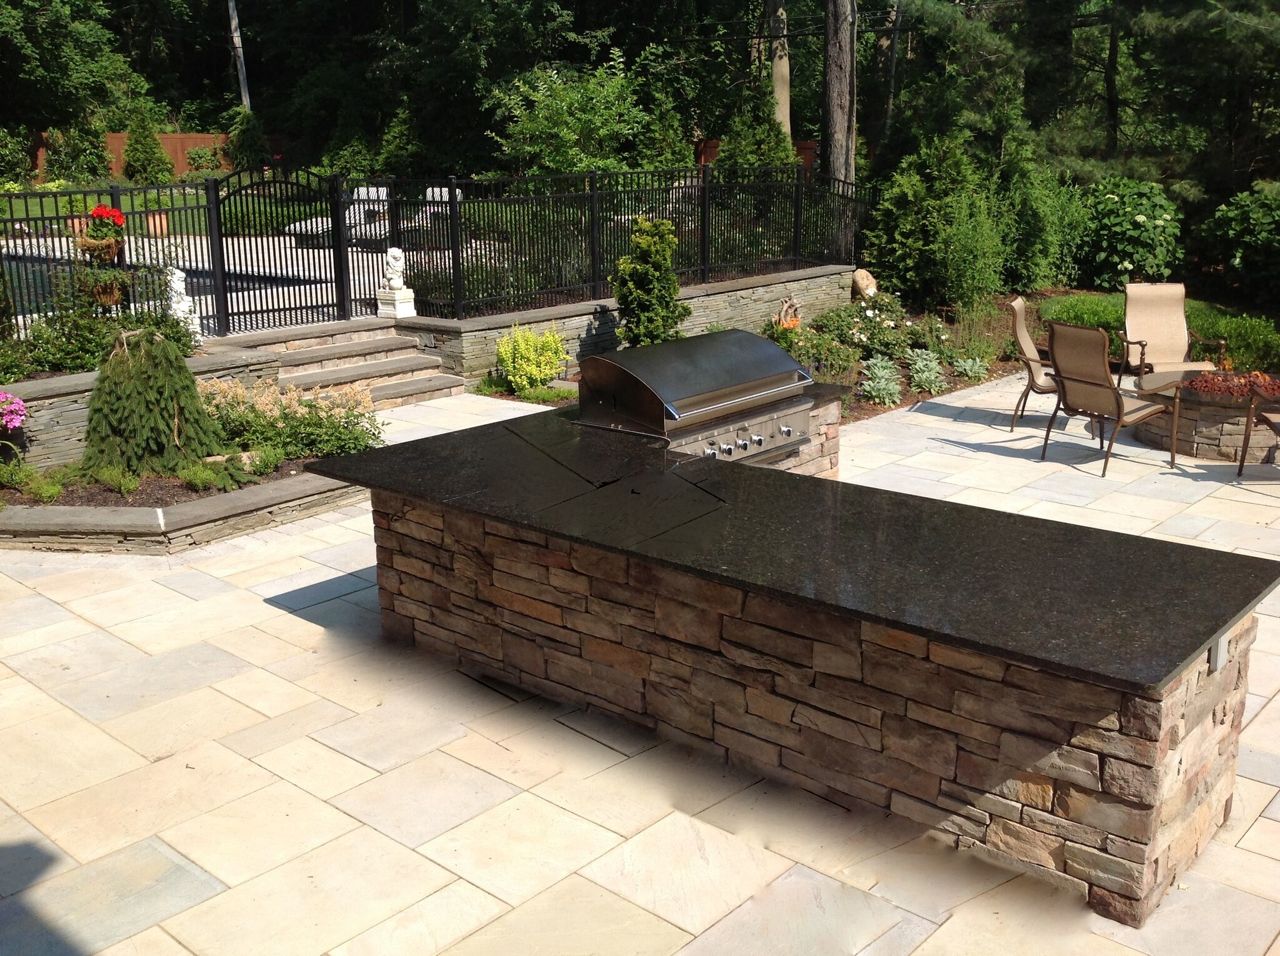 Granite-Topped Outdoor Kitchen: 